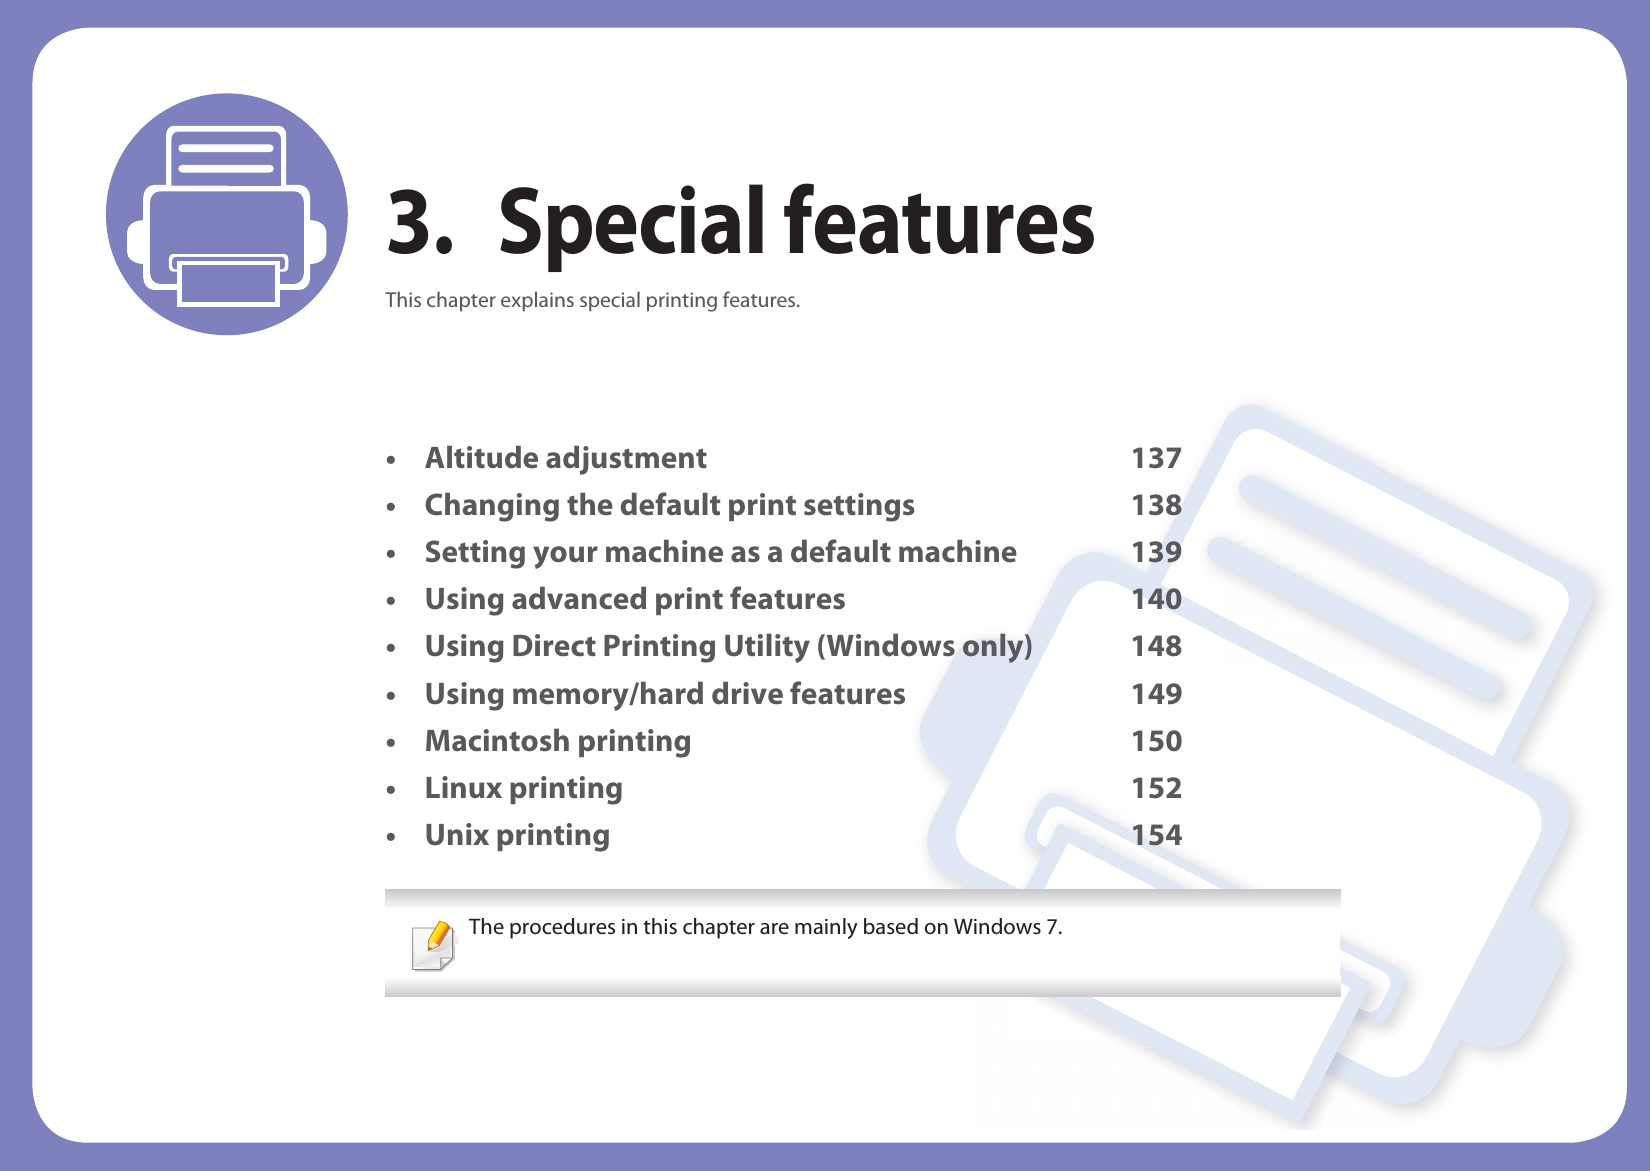 3. Special featuresThis chapter explains special printing features.• Altitude adjustment 137• Changing the default print settings 138• Setting your machine as a default machine 139• Using advanced print features 140• Using Direct Printing Utility (Windows only) 148• Using memory/hard drive features 149• Macintosh printing 150• Linux printing 152• Unix printing 154 The procedures in this chapter are mainly based on Windows 7. 